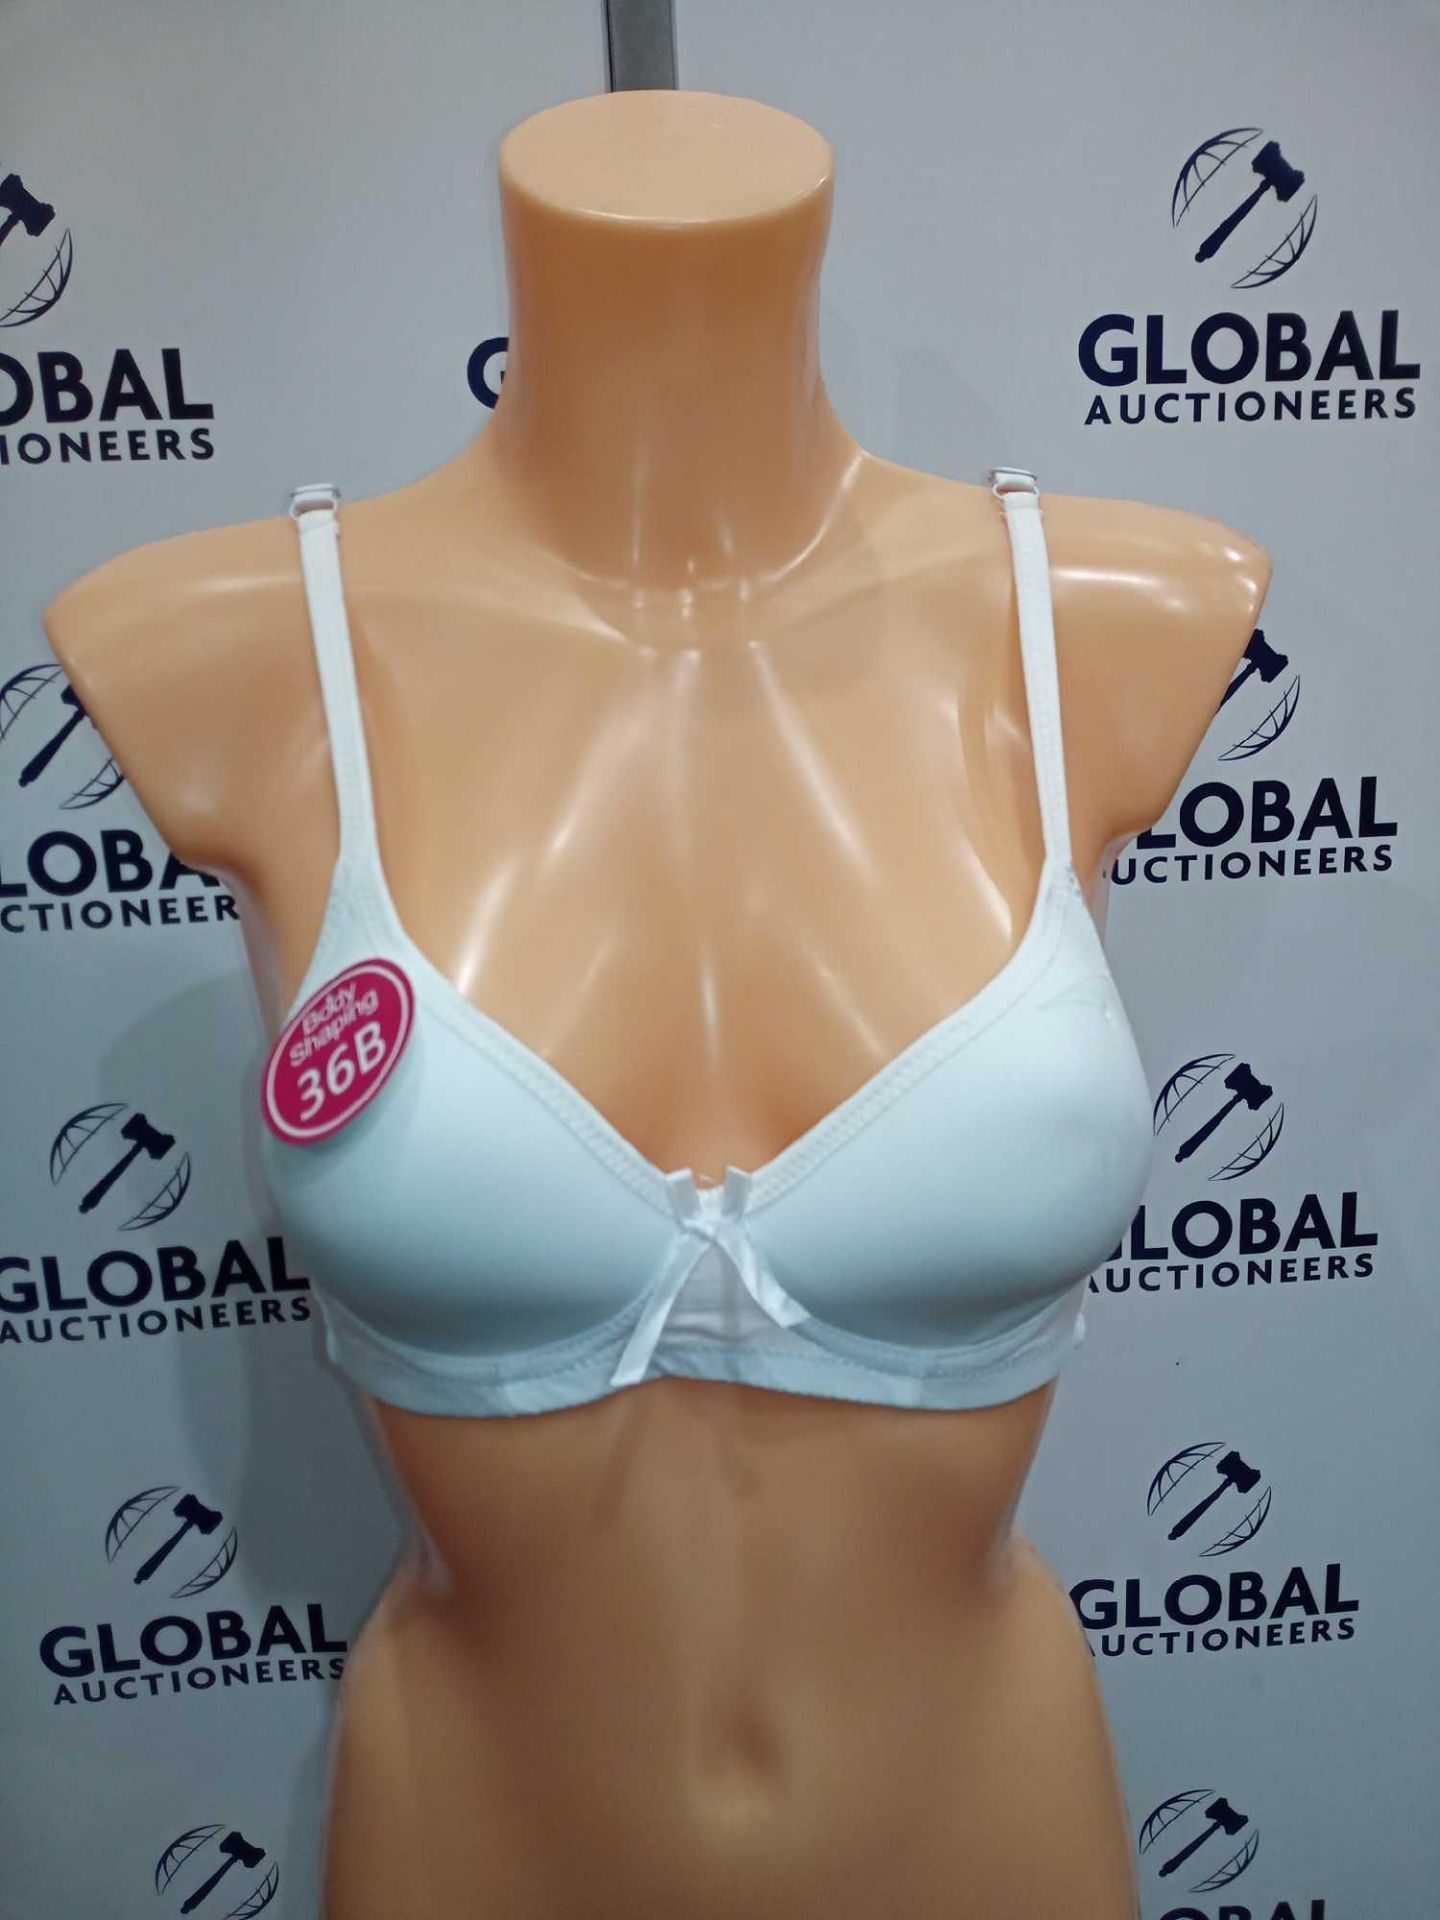 RRP £270 Lot To Contain 3 Brand New Packs Of 6 Hana Body Shaping Bras In White Colour Sizes 38C-